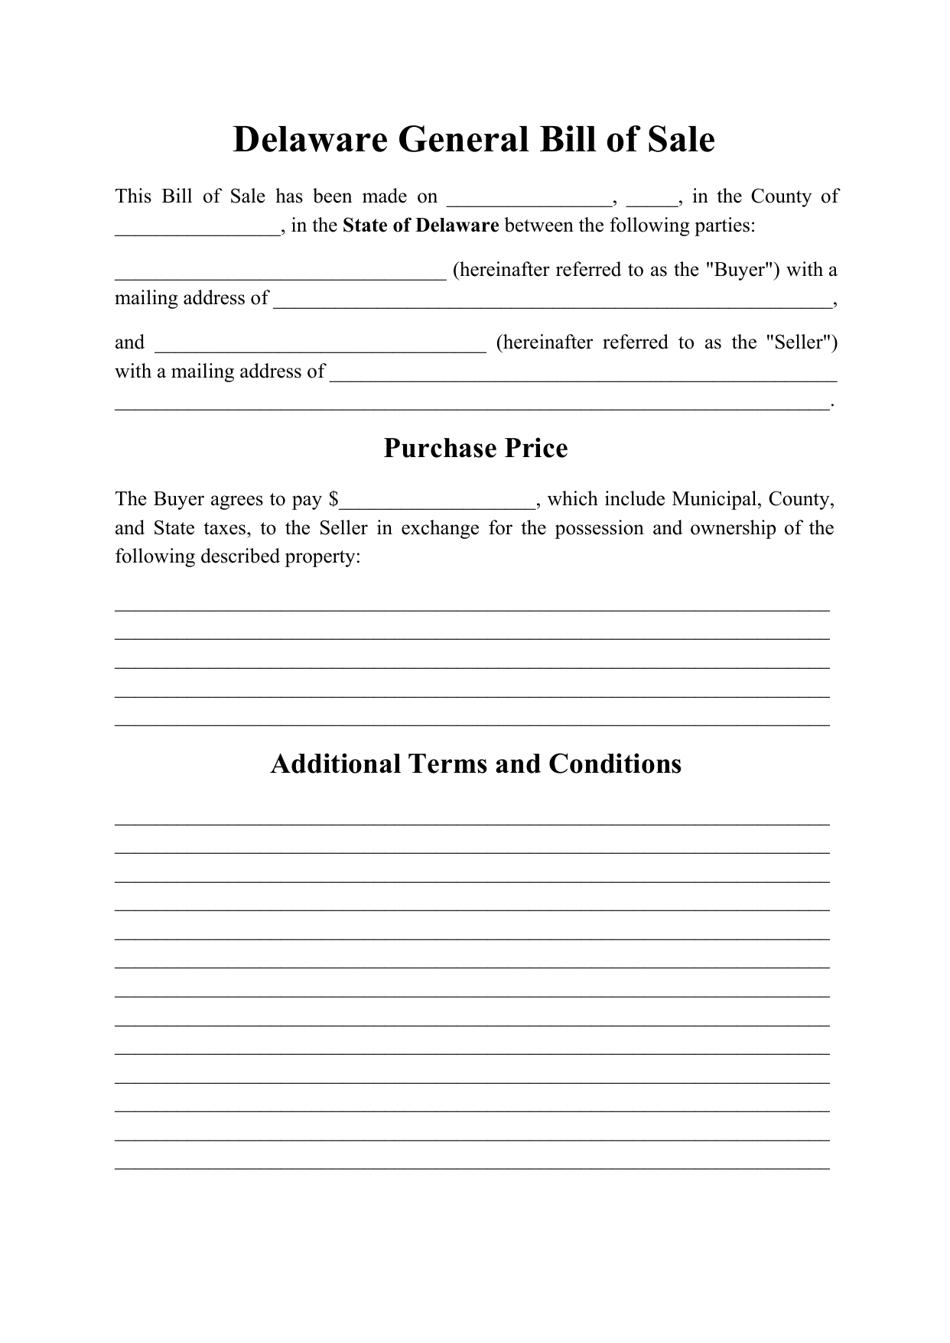 Generic Bill of Sale Form - Delaware, Page 1